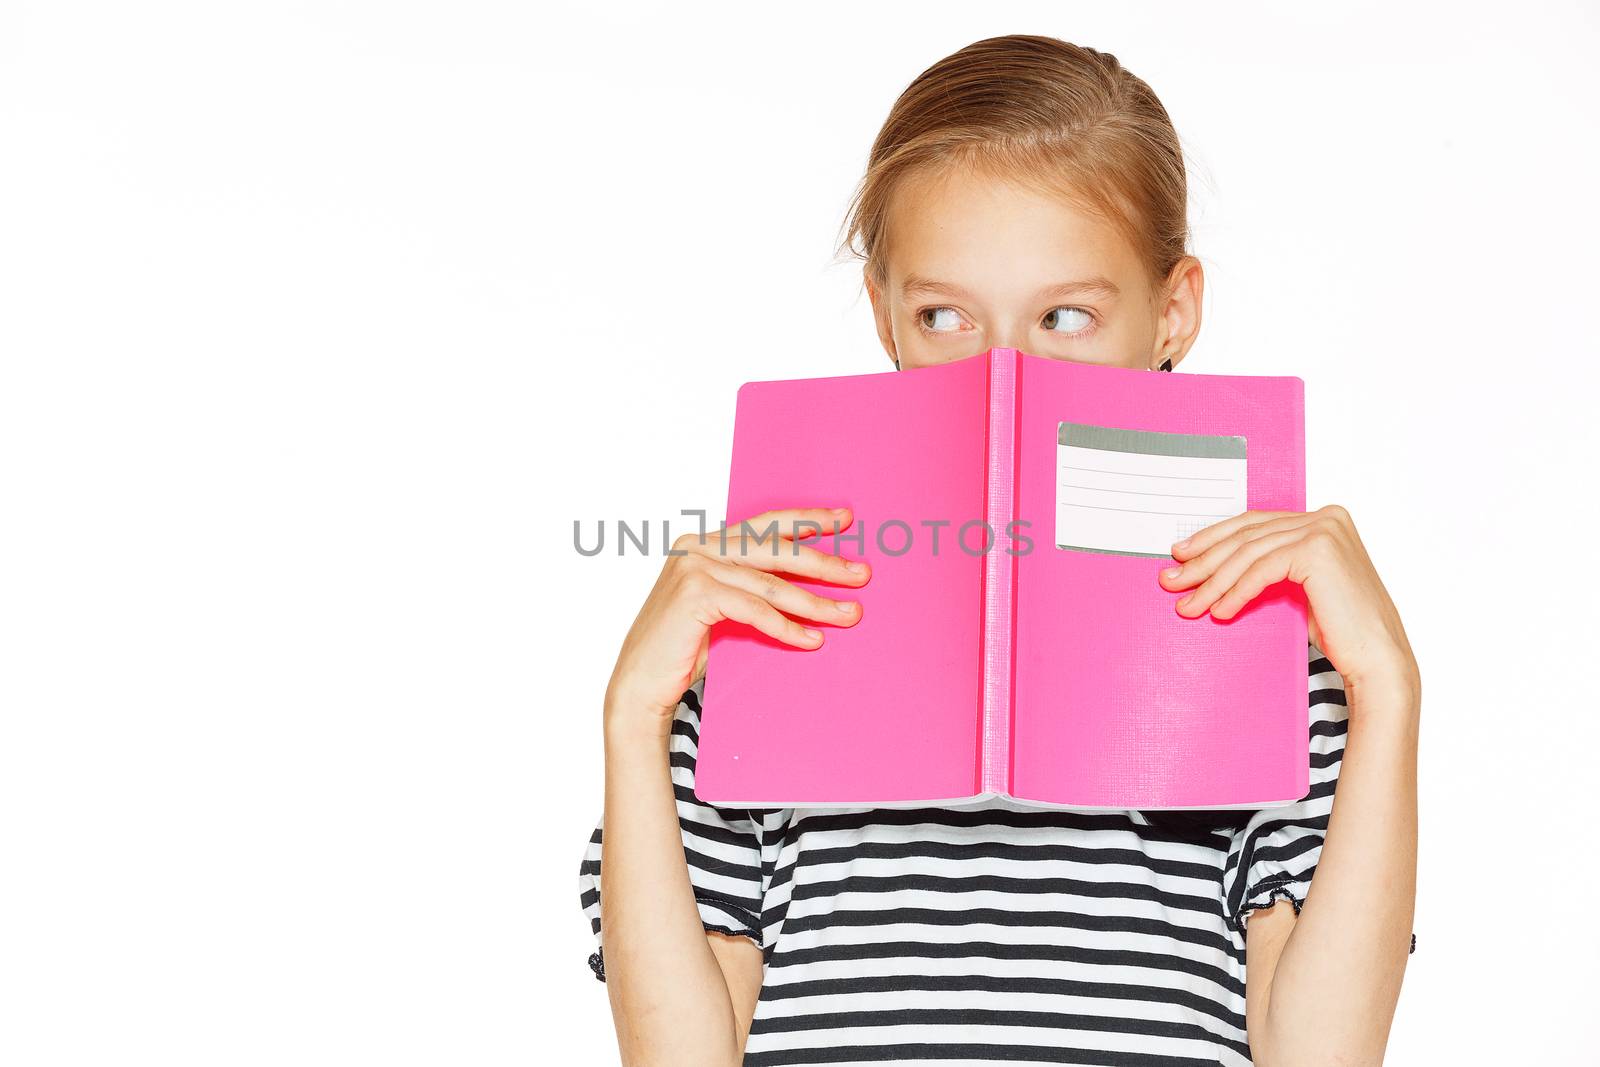 Beautiful little girl in blue dress with copybook. Isolated on white.